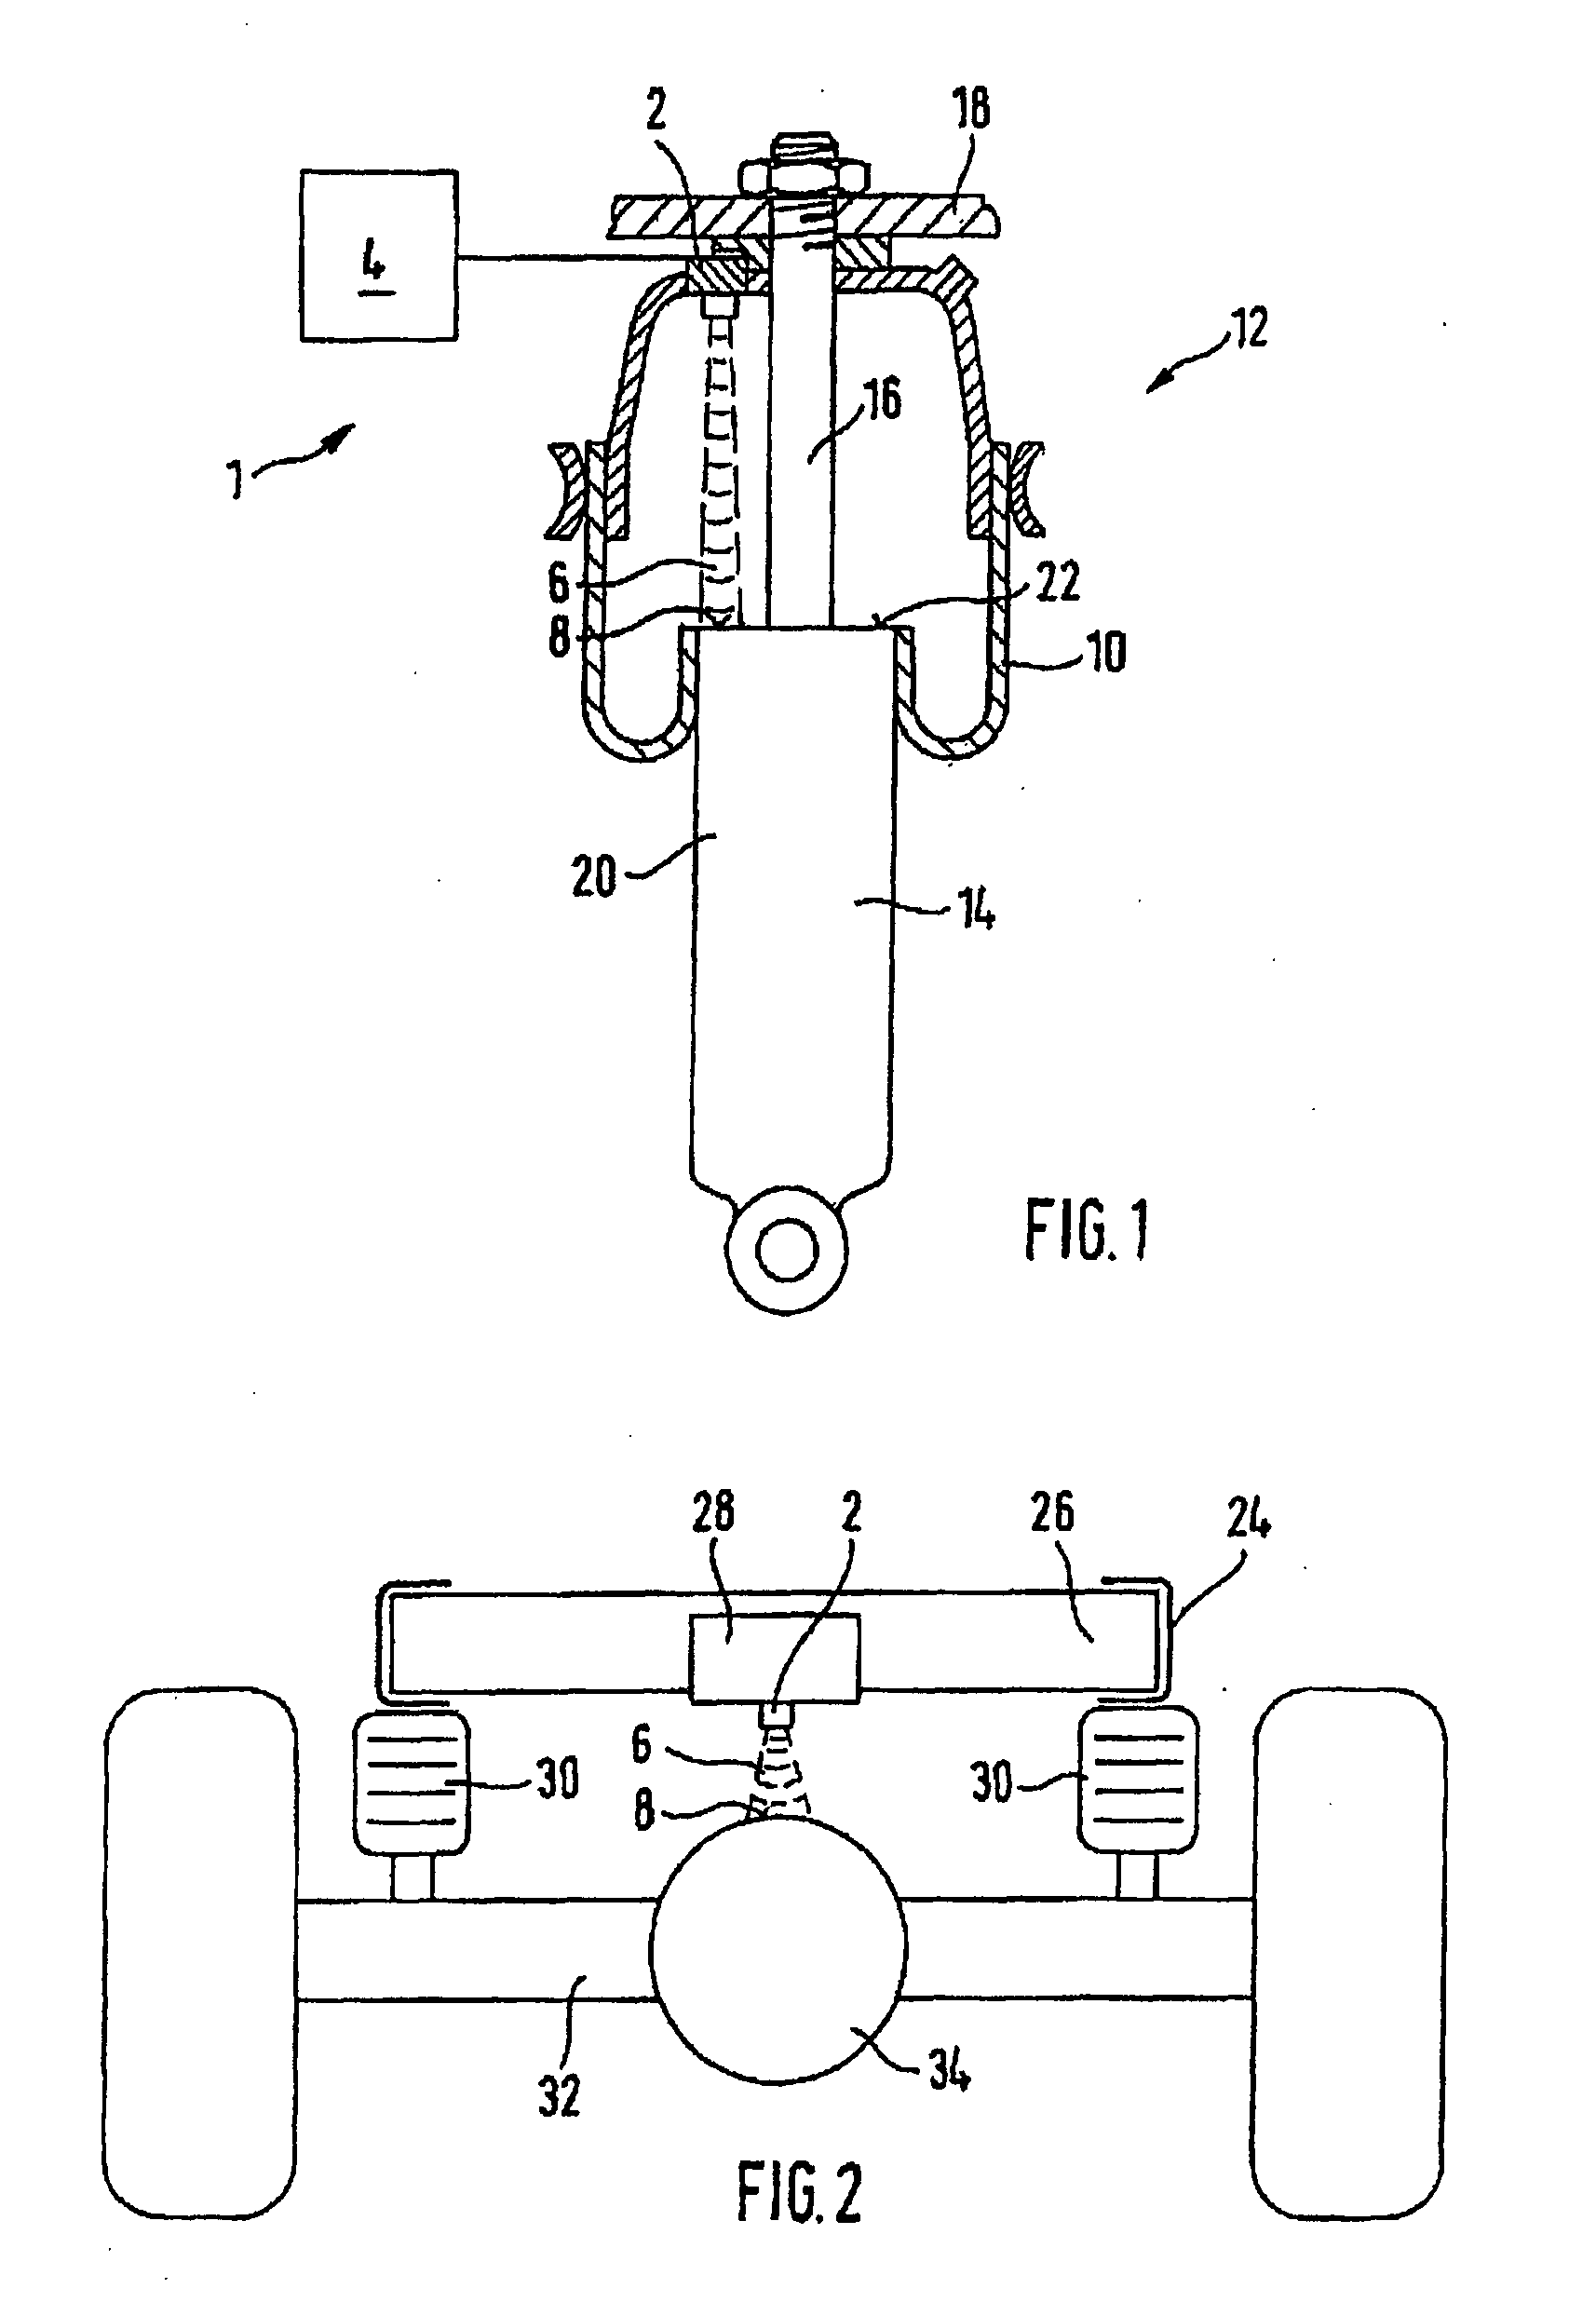 Sensor device for measuring the compression travel and/or the compression rate of wheels and/or axles of vehicles